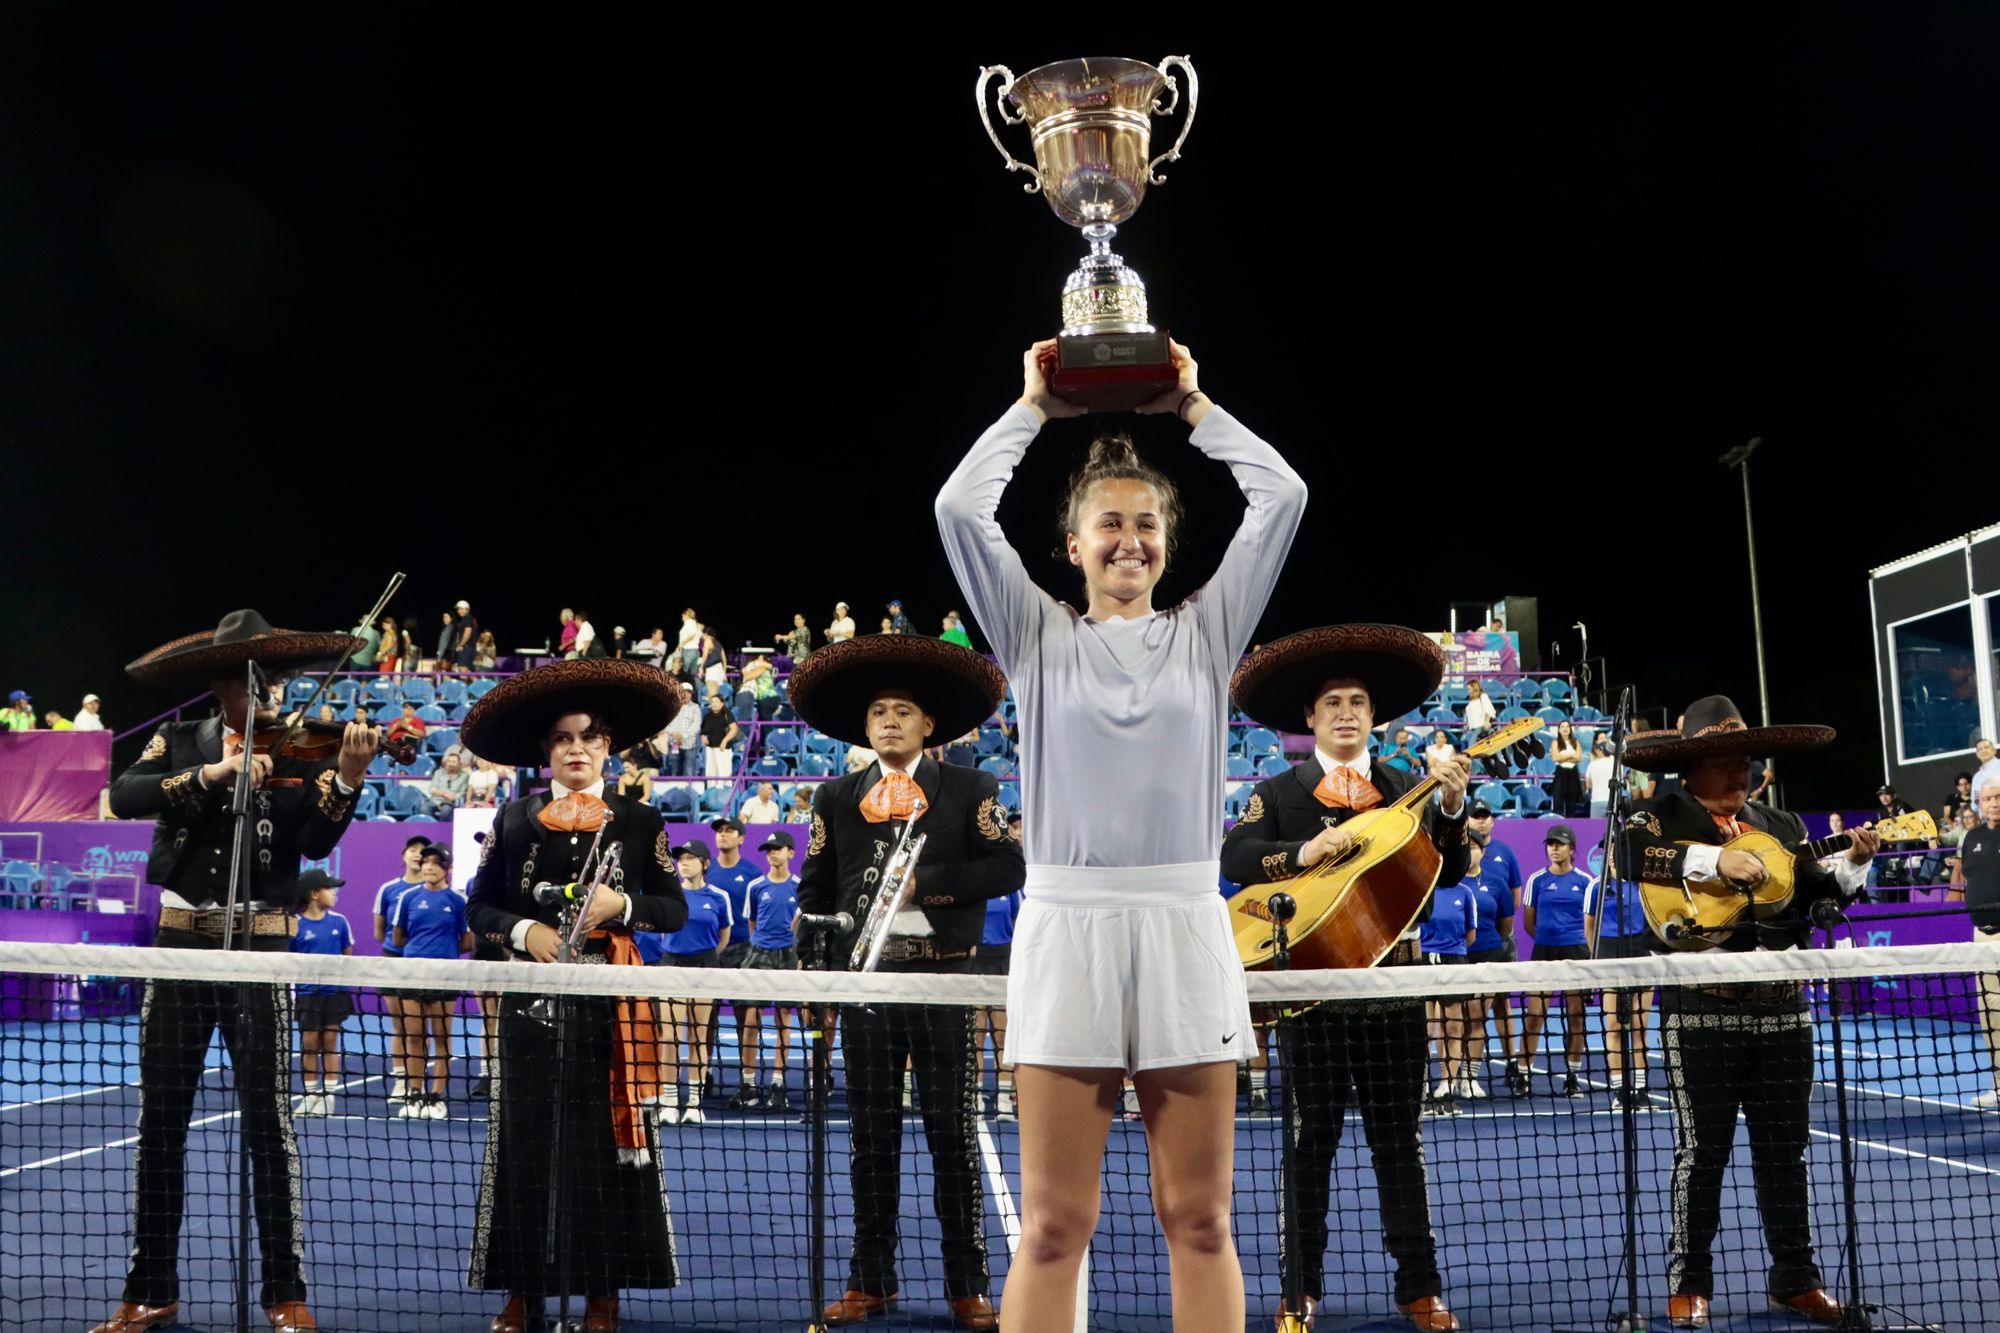 Emina Bektas raises a trophy with a mariachi band playing behind her.